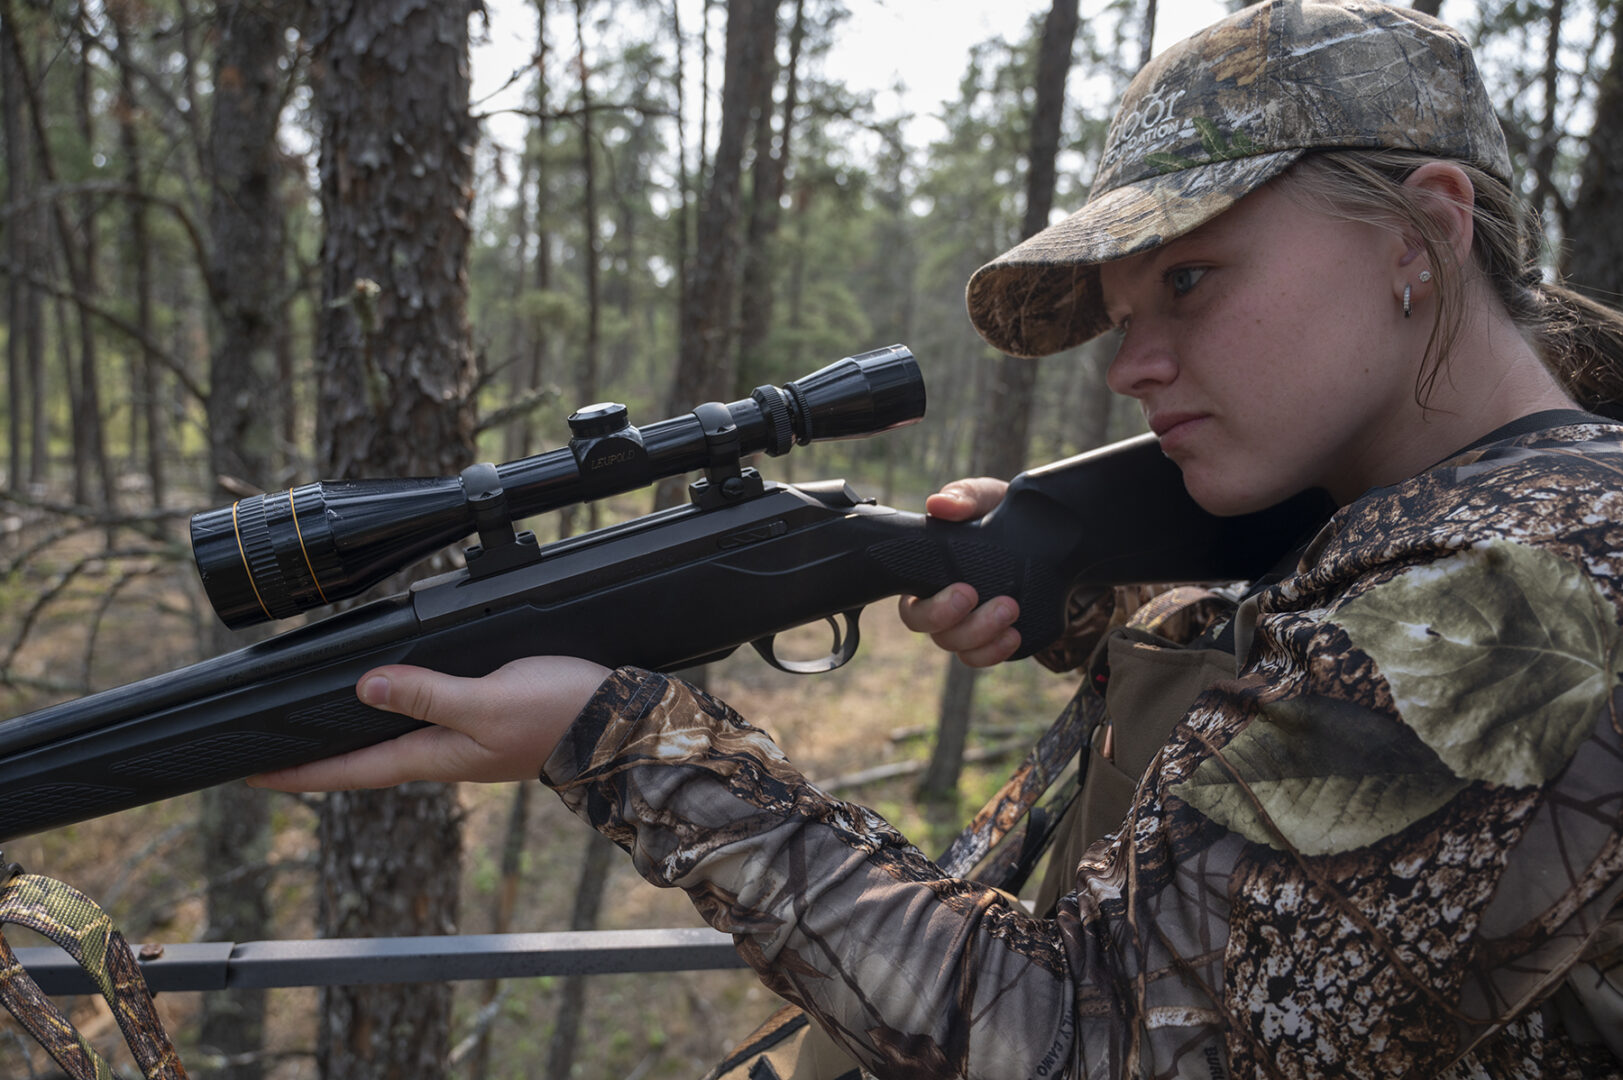 A woman in camouflage holding a rifle and looking through the scope.